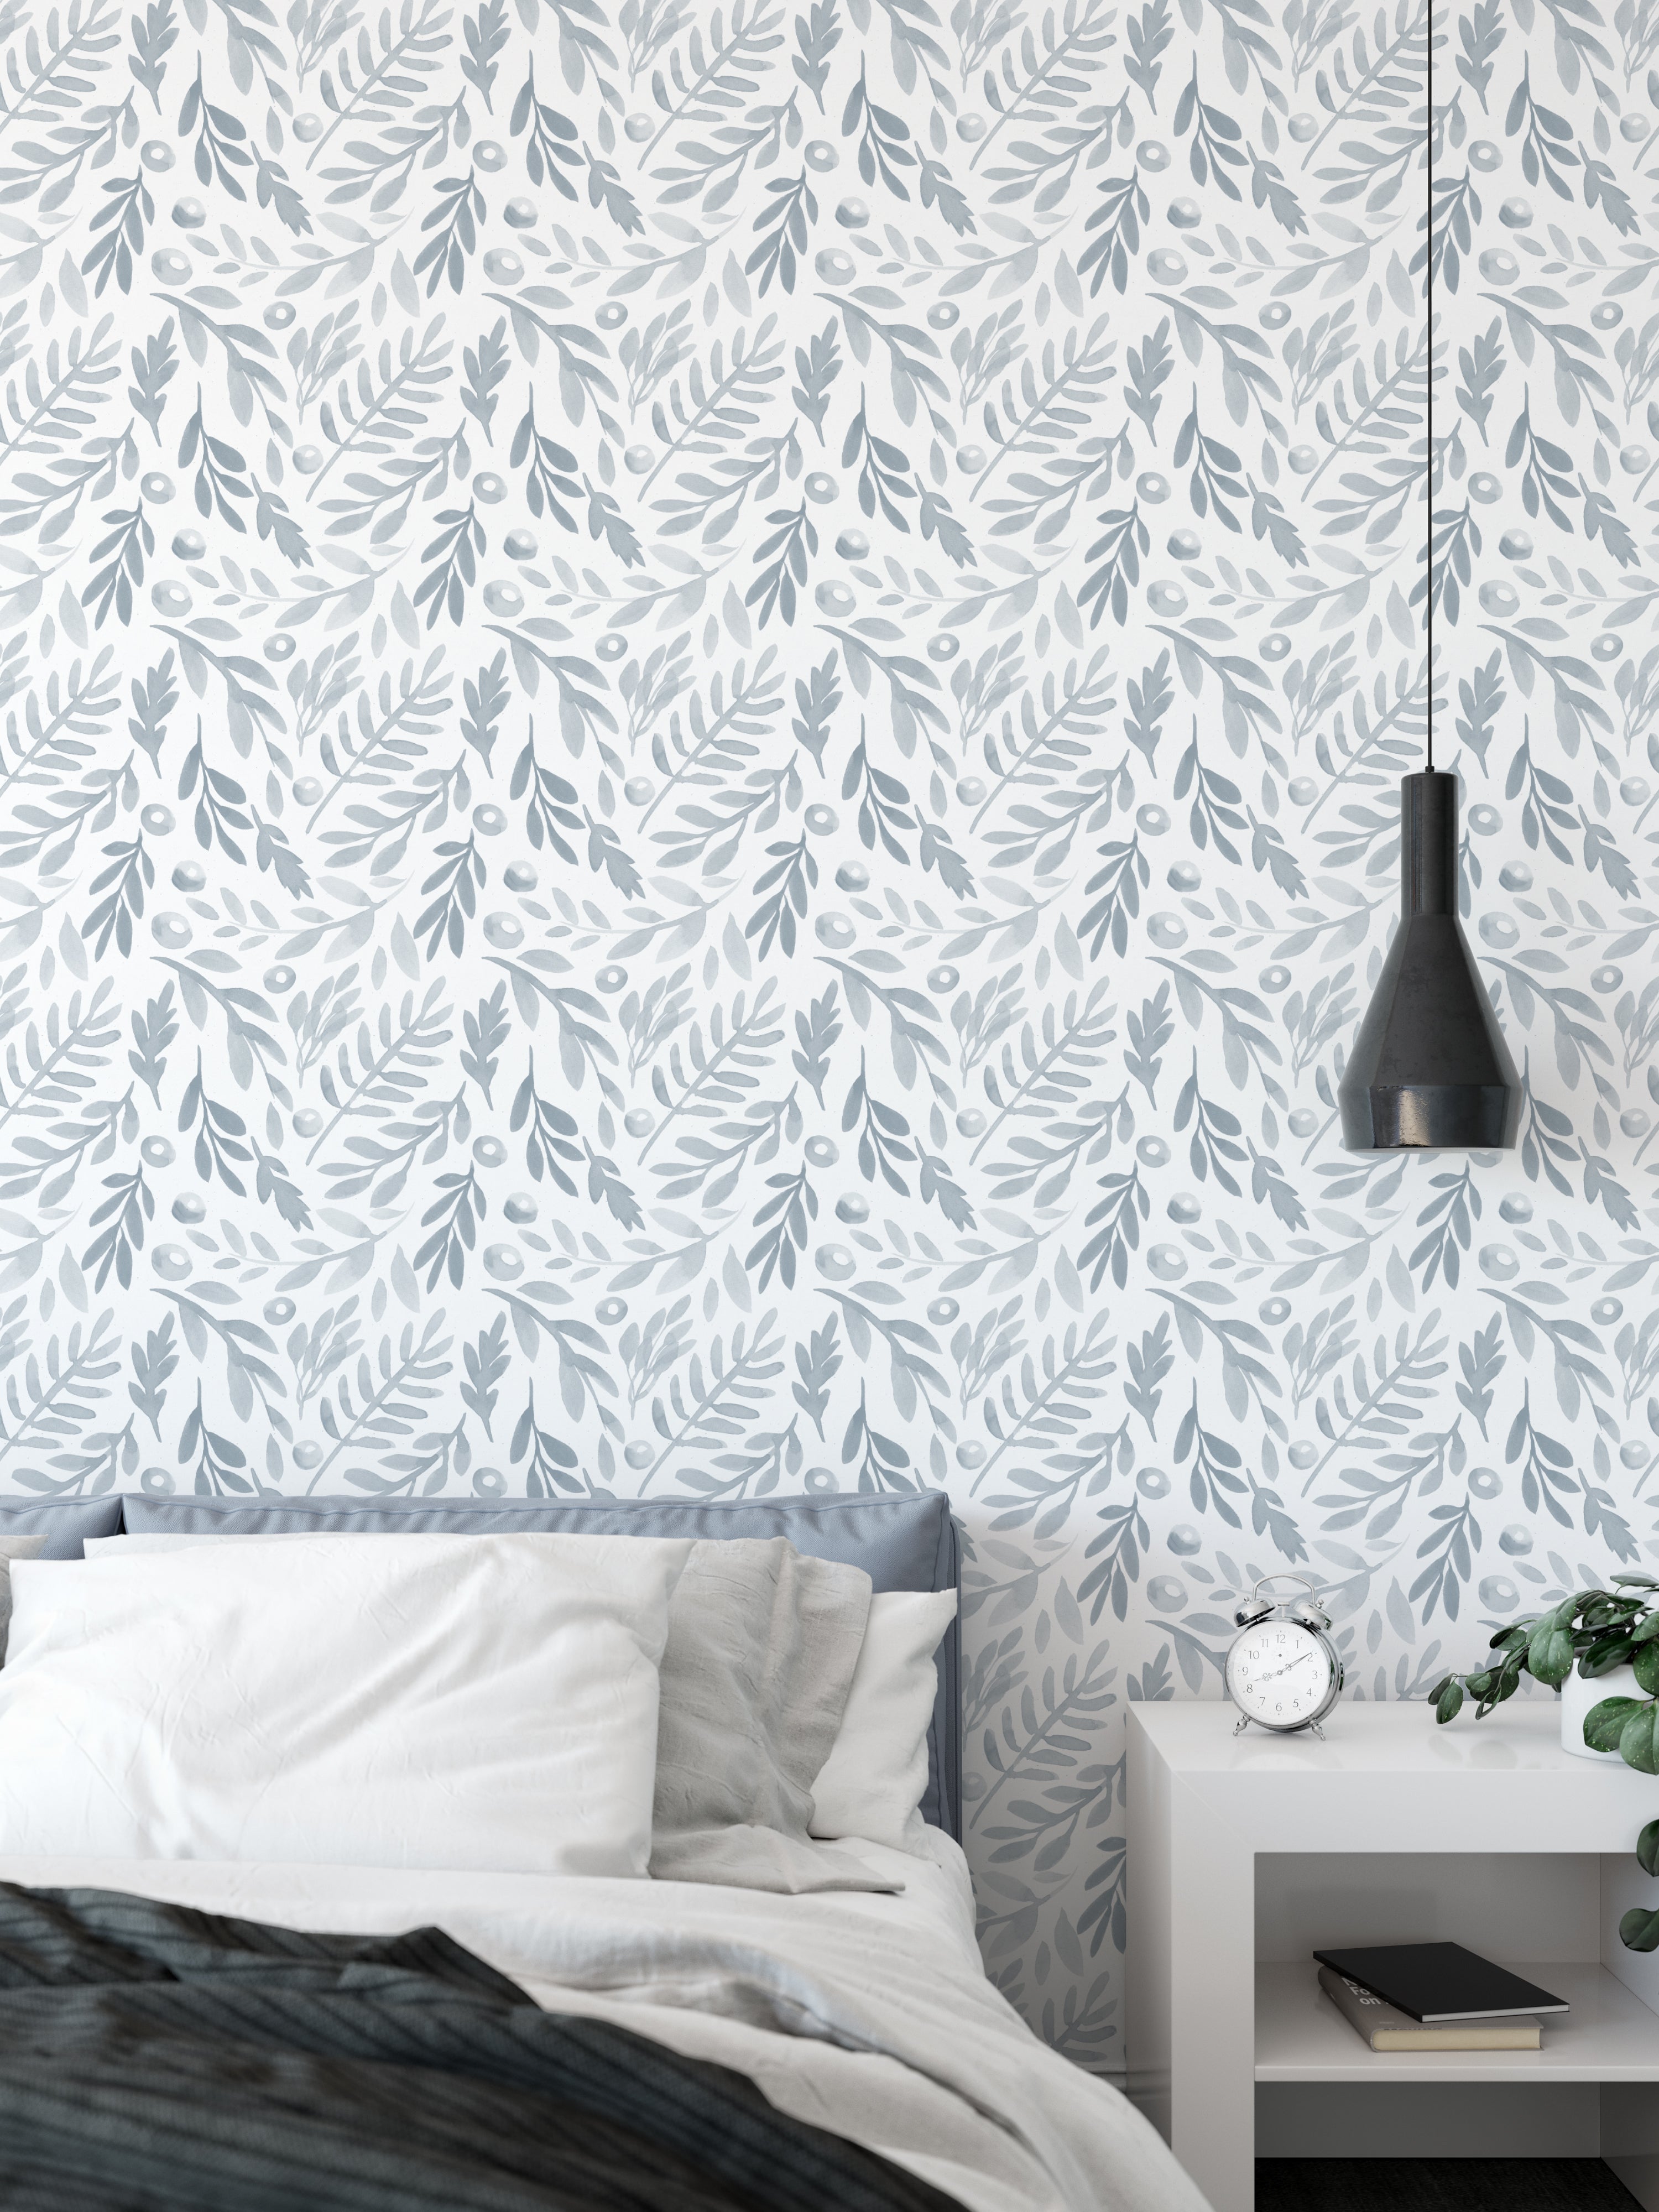 A bedroom setting adorned with 'Watercolor Subtle Botanica - Pale Blue' wallpaper that brings a soothing ambiance to the room. The pale blue leafy design pairs well with the minimalistic bedroom furniture, enhancing the peaceful and restful environment.